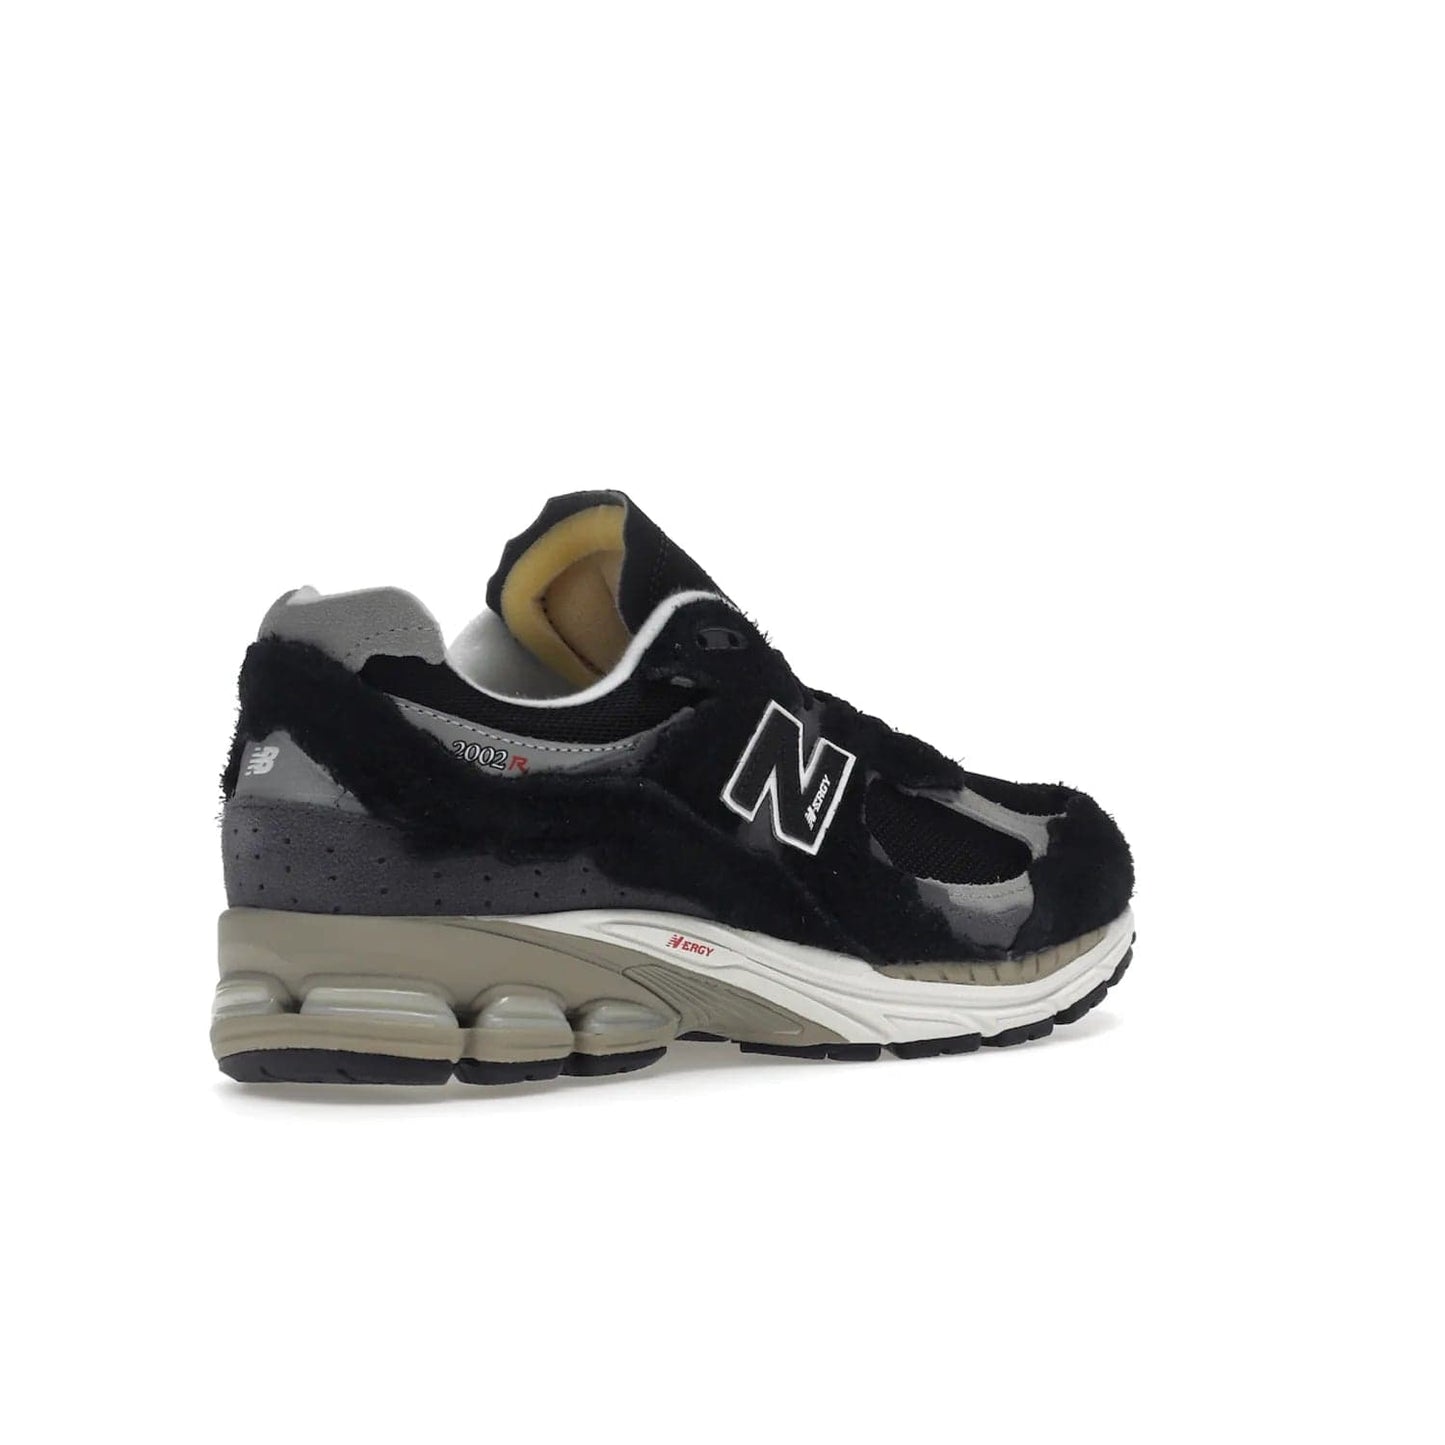 New Balance 2002R Protection Pack Black Grey - Image 33 - Only at www.BallersClubKickz.com - Look stylish in the New Balance 2002R Protection Pack Black Grey. Uppers constructed from premium materials like mesh and synthetic overlays. Iconic "N" emblem appears in white and black. ABZORB midsole for shock absorption and responsiveness. Black outsole for grip and traction. Lacing system offers customized fit and cushioned tongue and collar offer comfort and stability. Step up your style with this must-hav